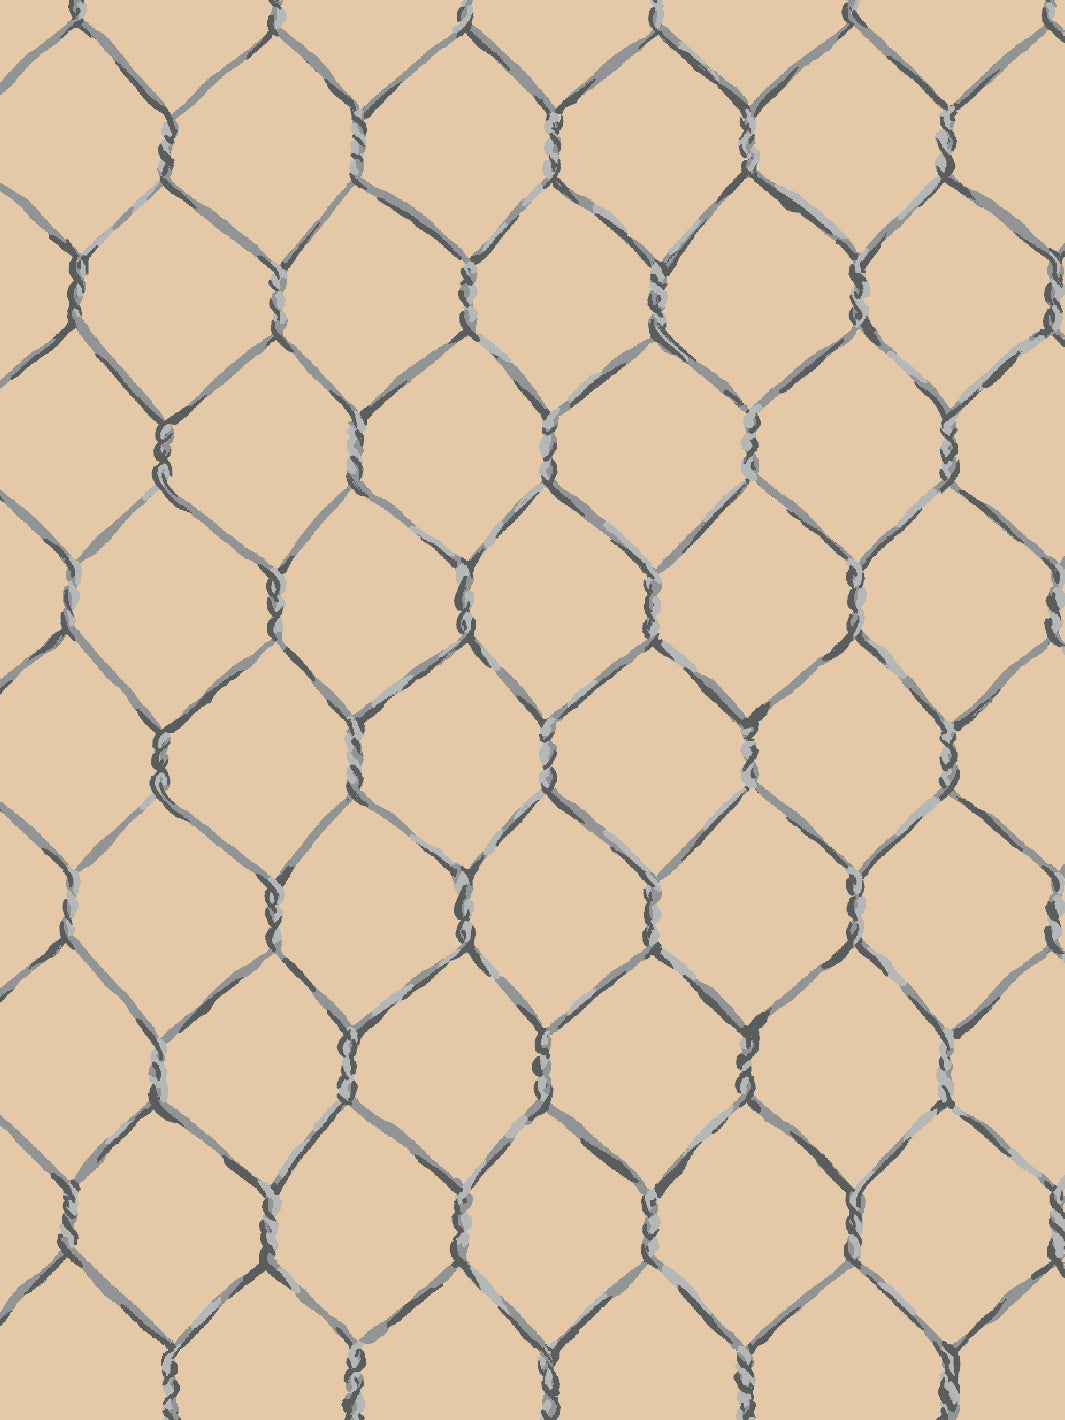 'Evelyn's Chicken Wire' Wallpaper by Sarah Jessica Parker - Metal on Driftwood